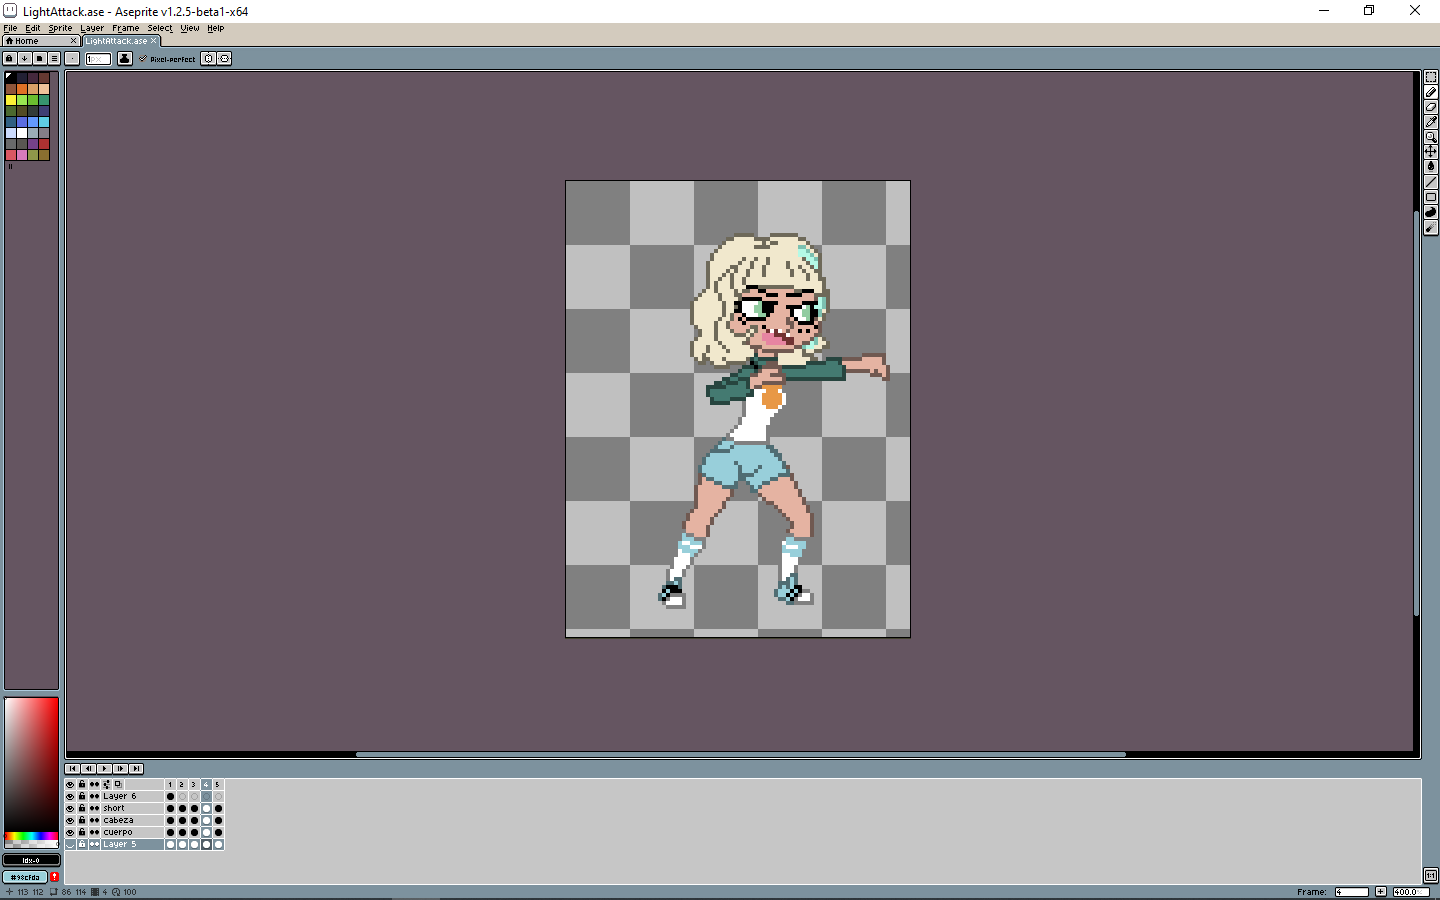 Working on Jackie's normals